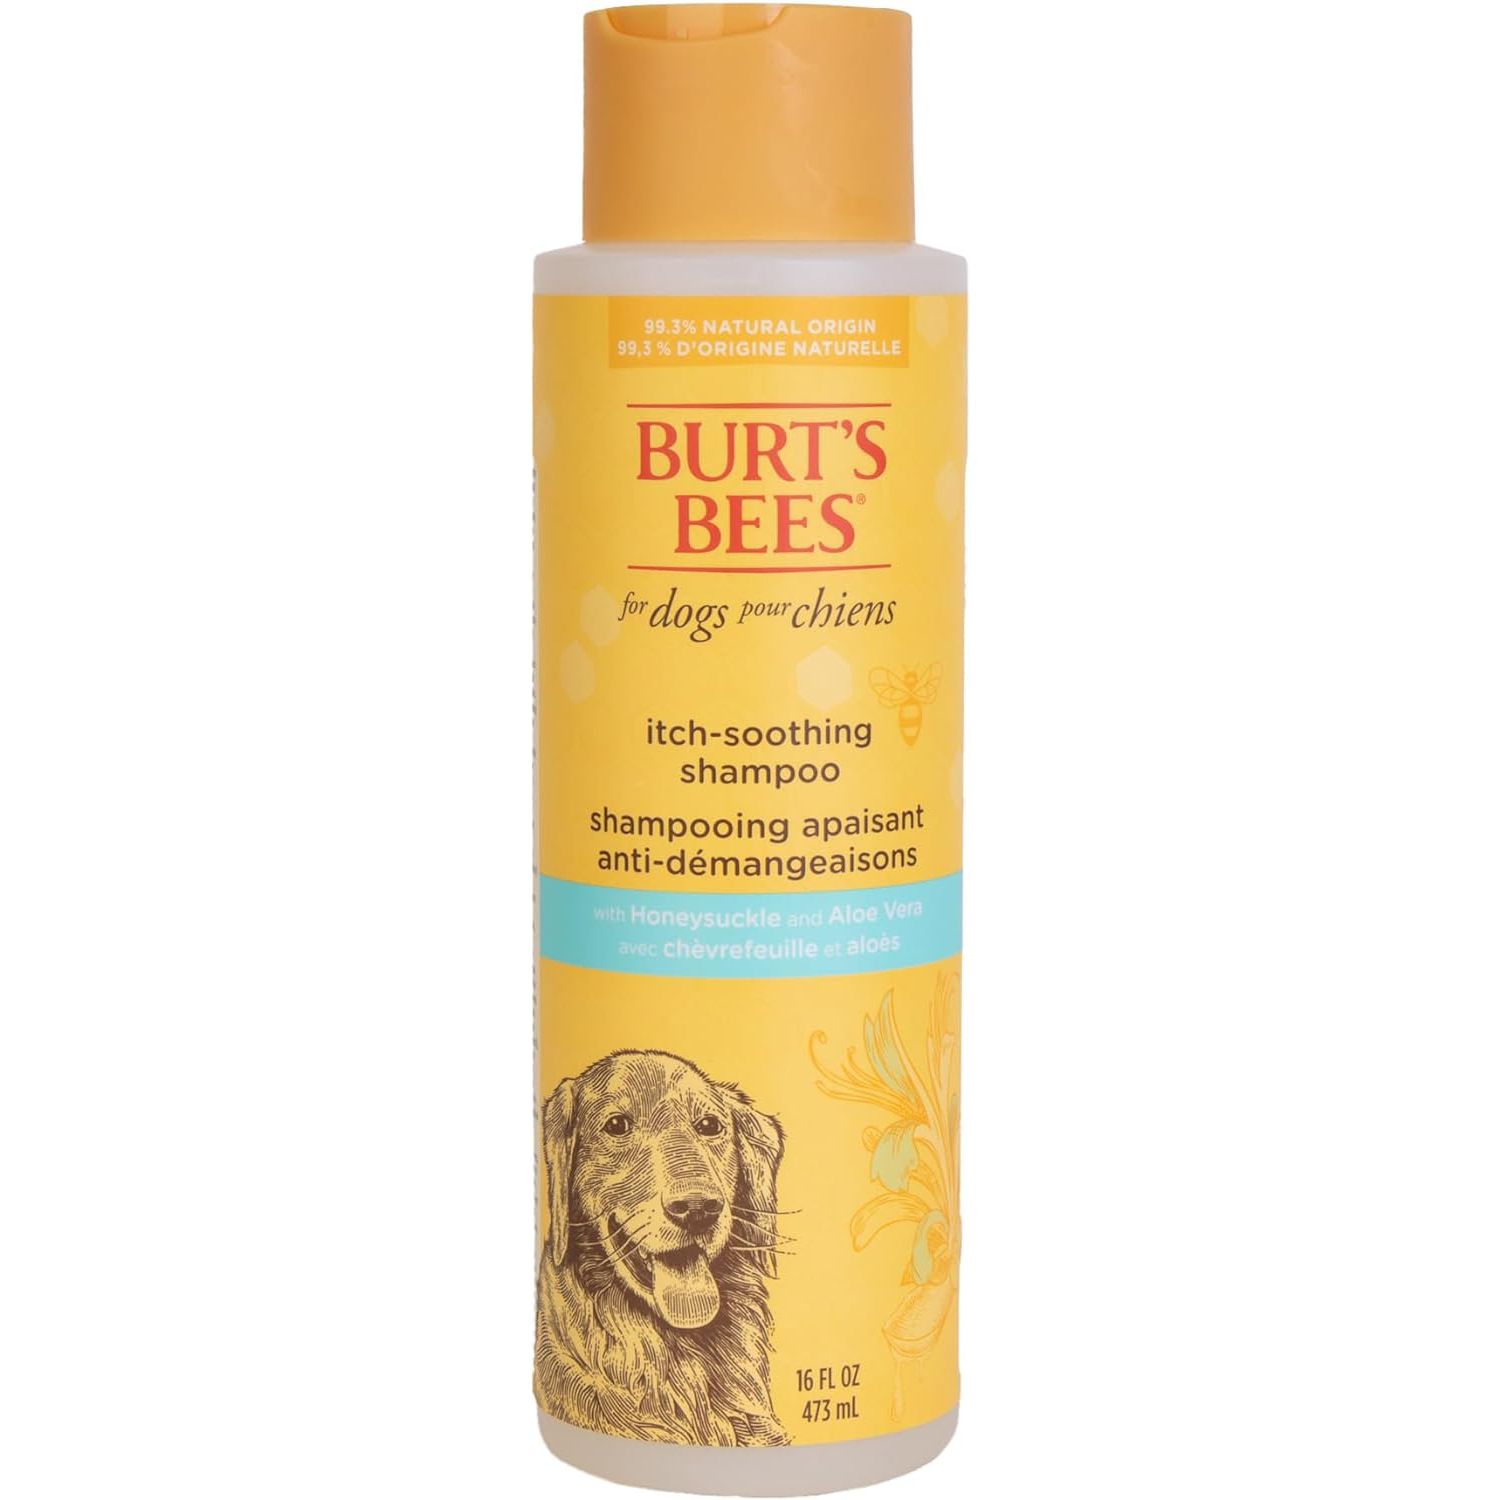 Burt's Bees for Pets Natural Itch Soothing Shampoo with Honeysuckle 